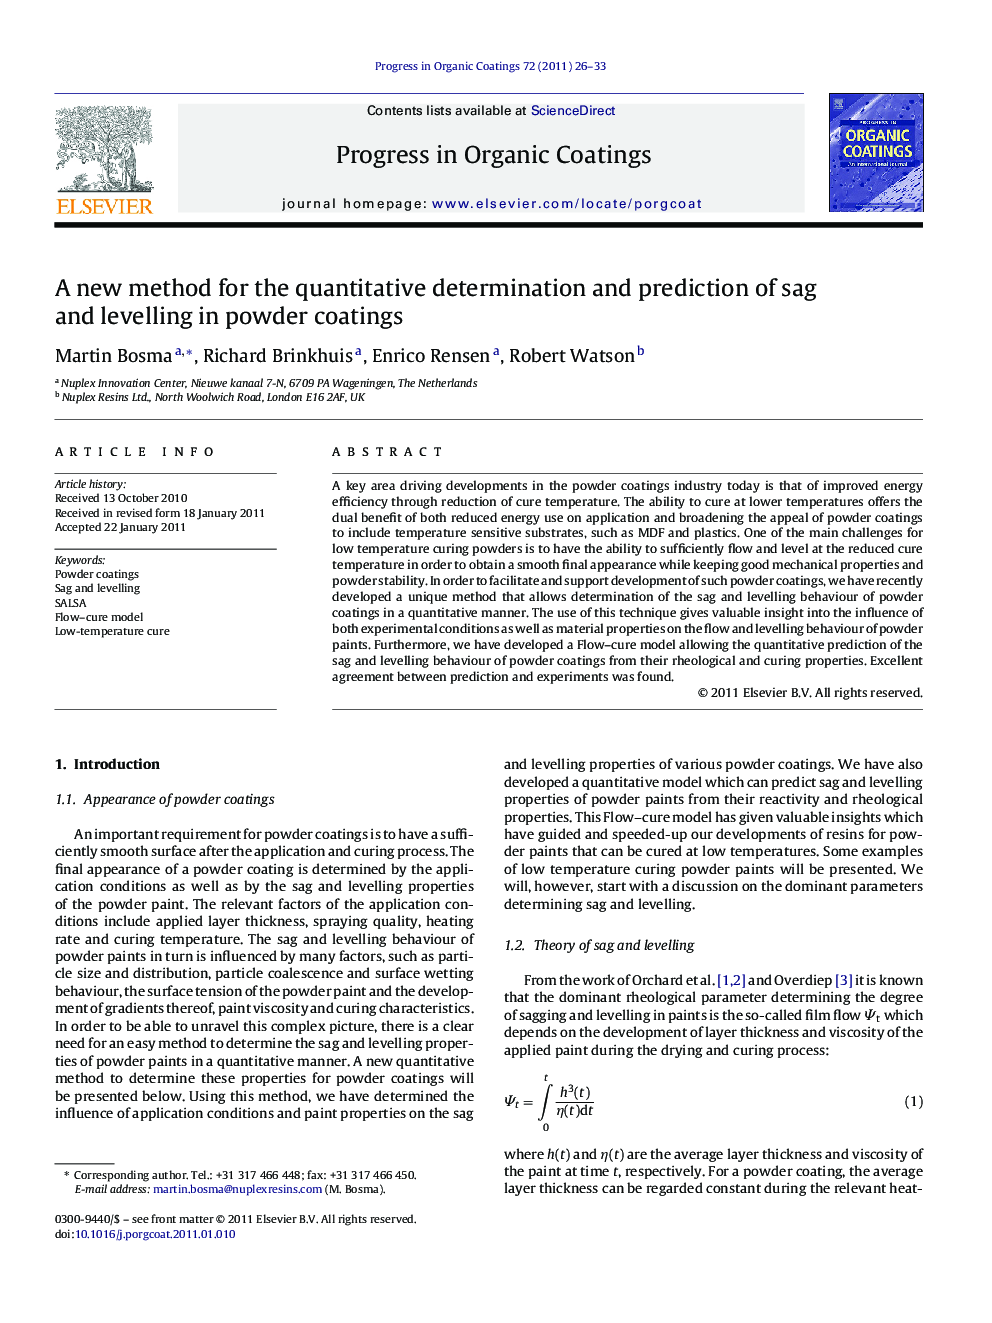 A new method for the quantitative determination and prediction of sag and levelling in powder coatings